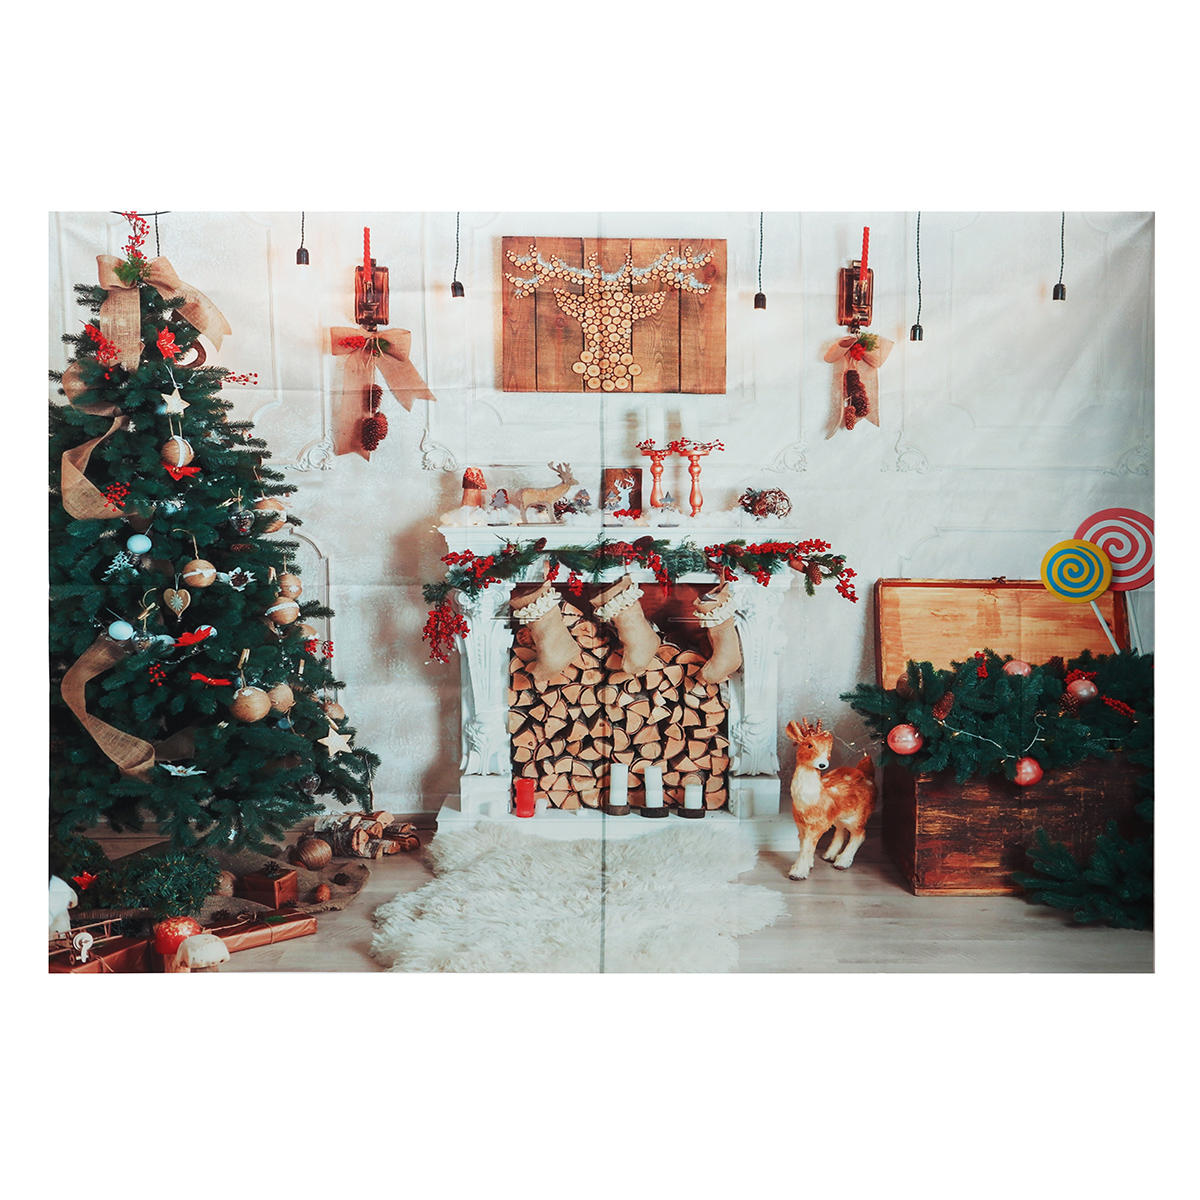 Bowling Green Fireplace Inspirational 8x6ft Christmas Tree Fireplace White Blanket Graphy Backdrop Studio Prop Background